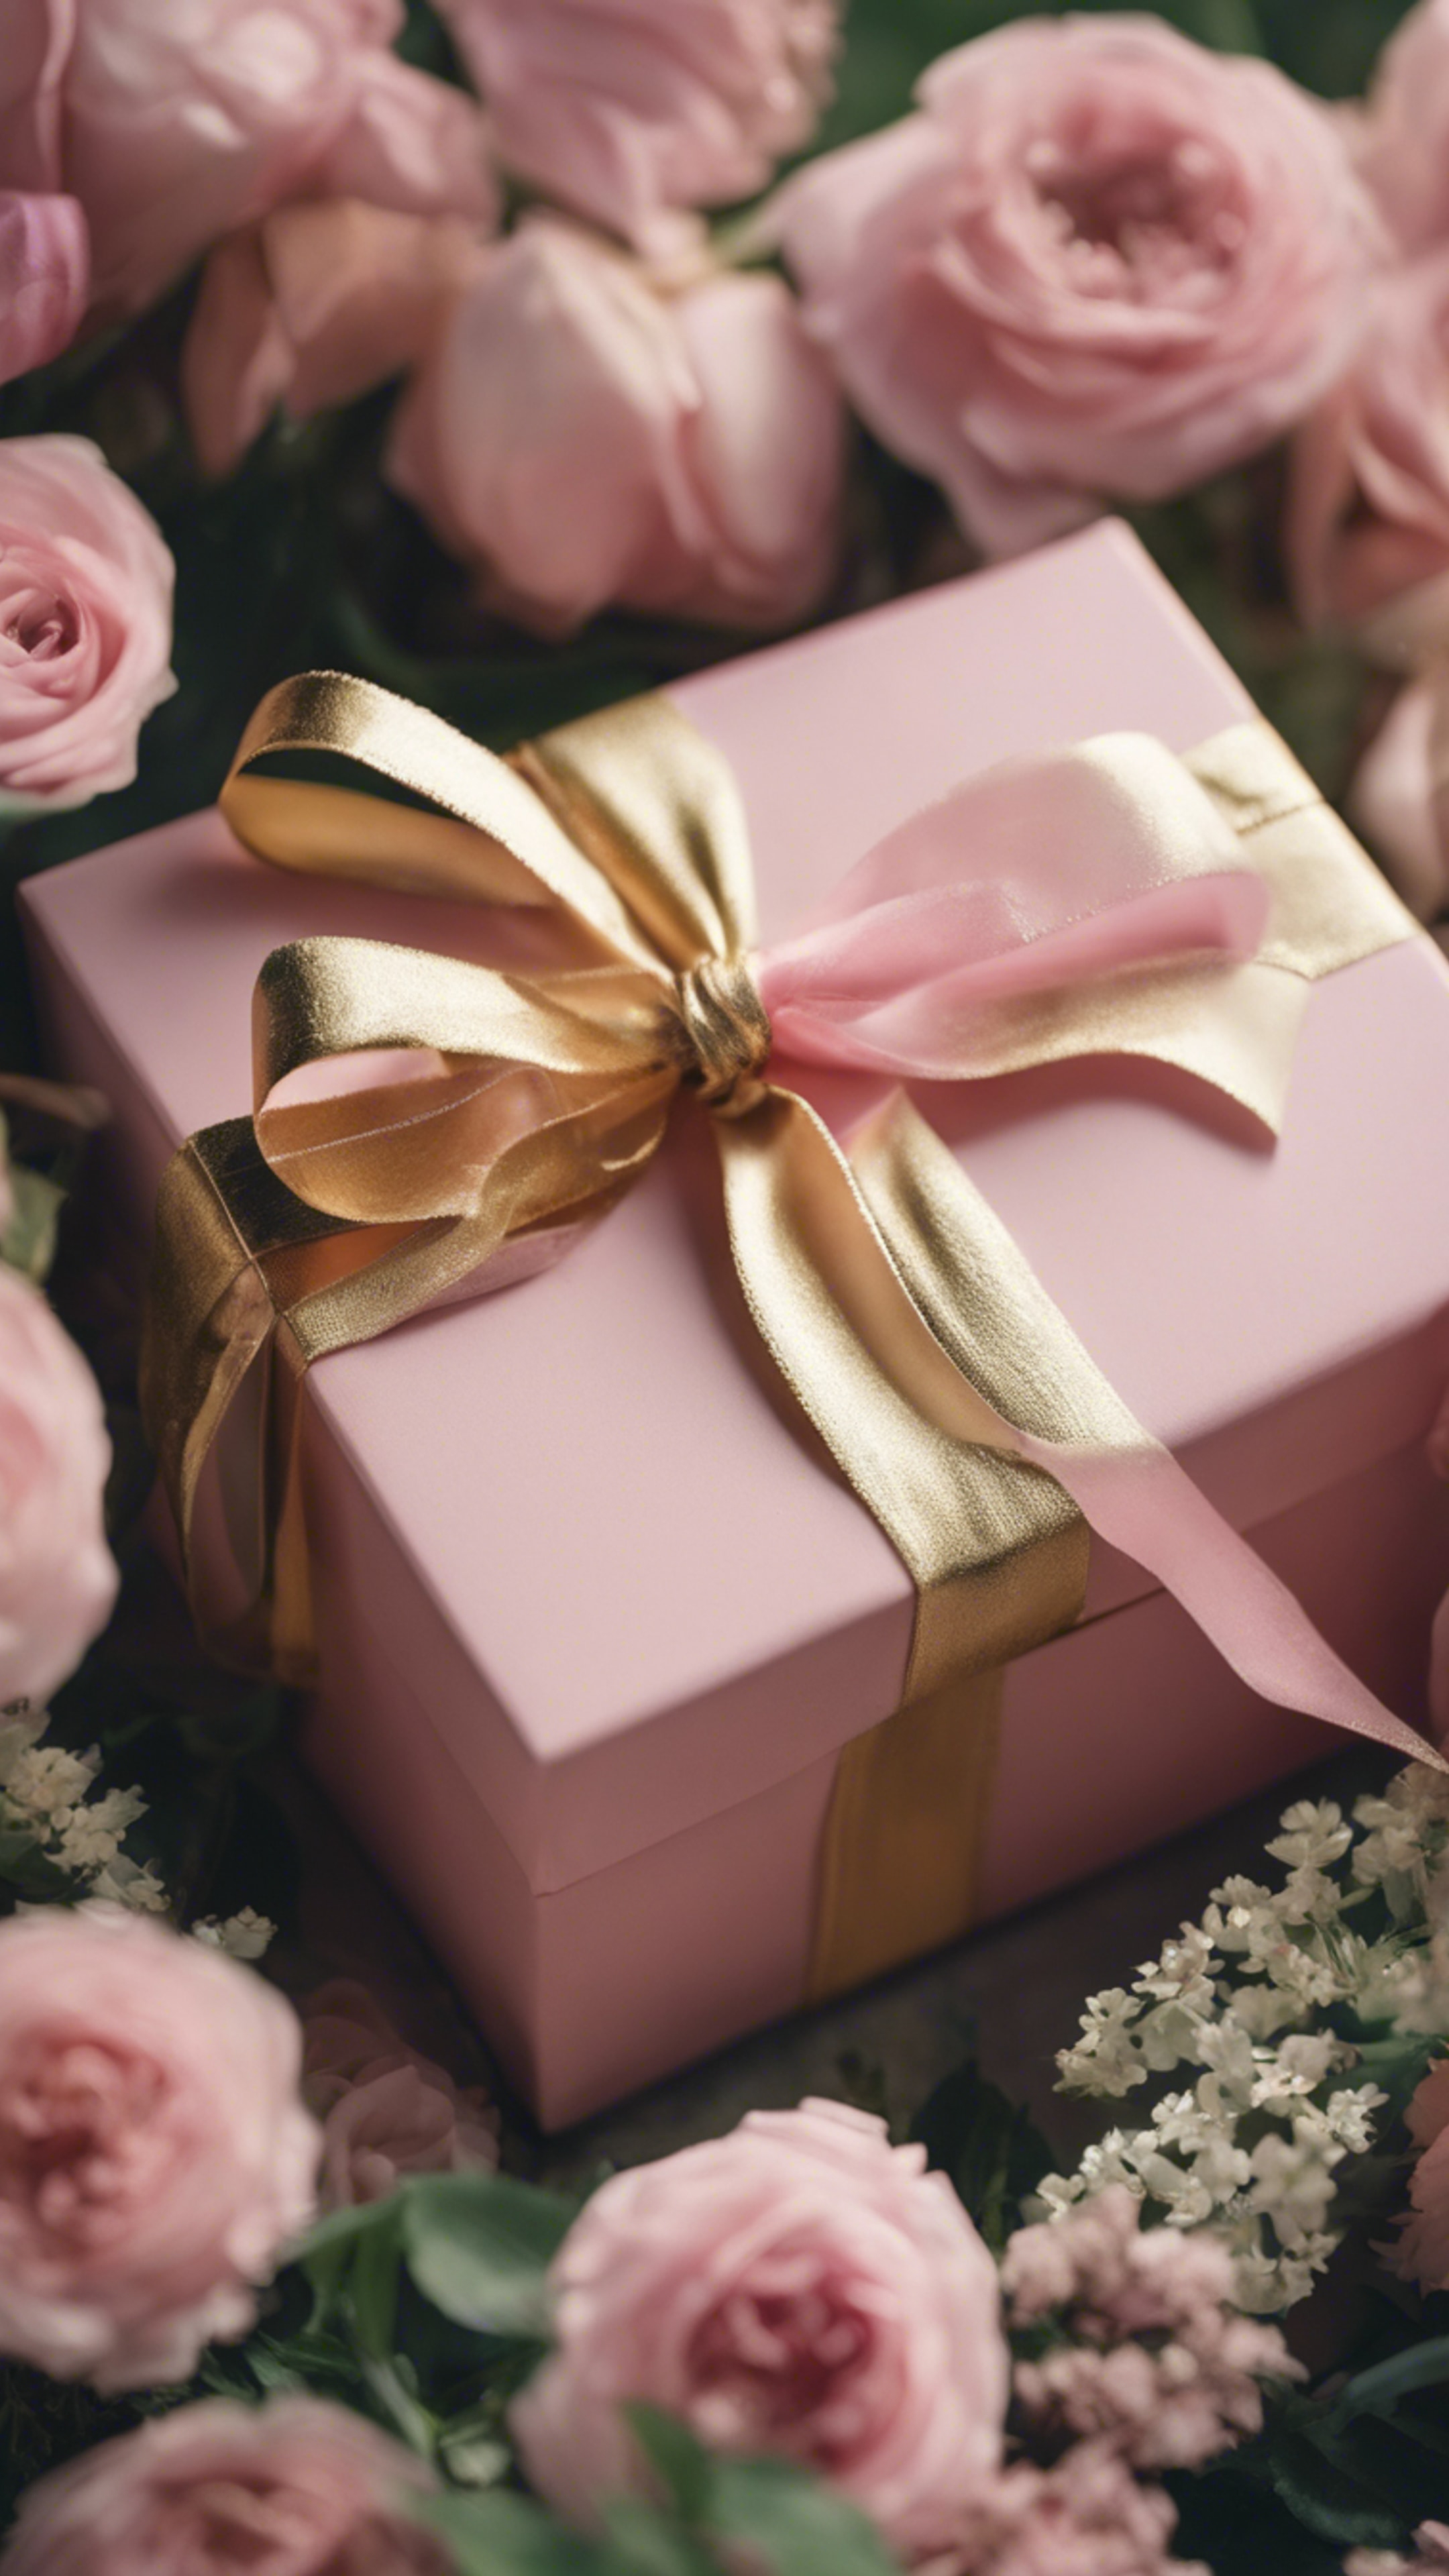 A gold-ribboned pink gift box nestled amongst flowers and greenery. Wallpaper[057f26c1d4b14d2a96a8]